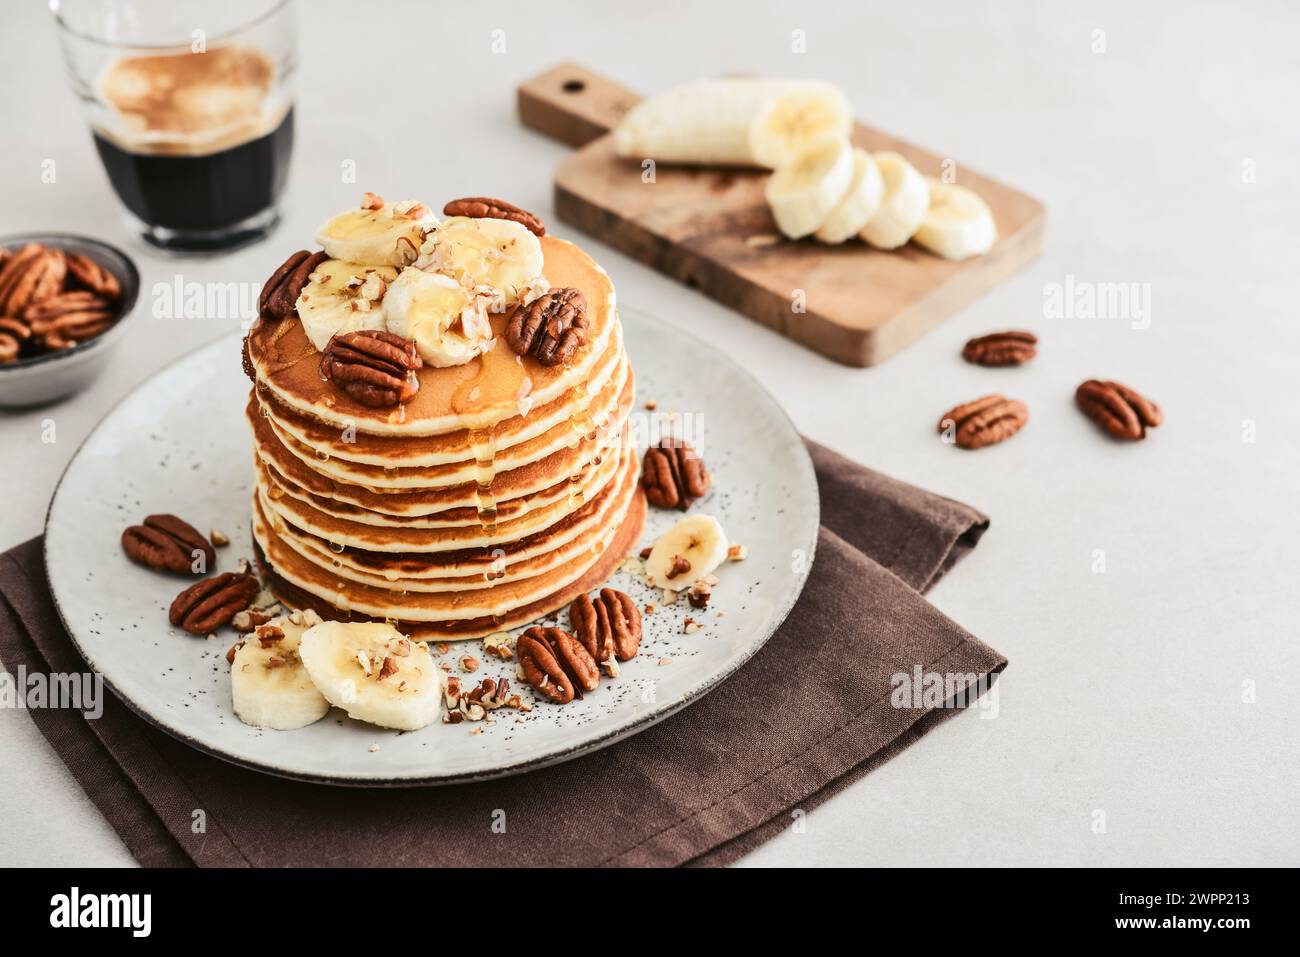 Plate of maple pecan pancakes with fresh bananas and coffee out in the background. Stock Photo